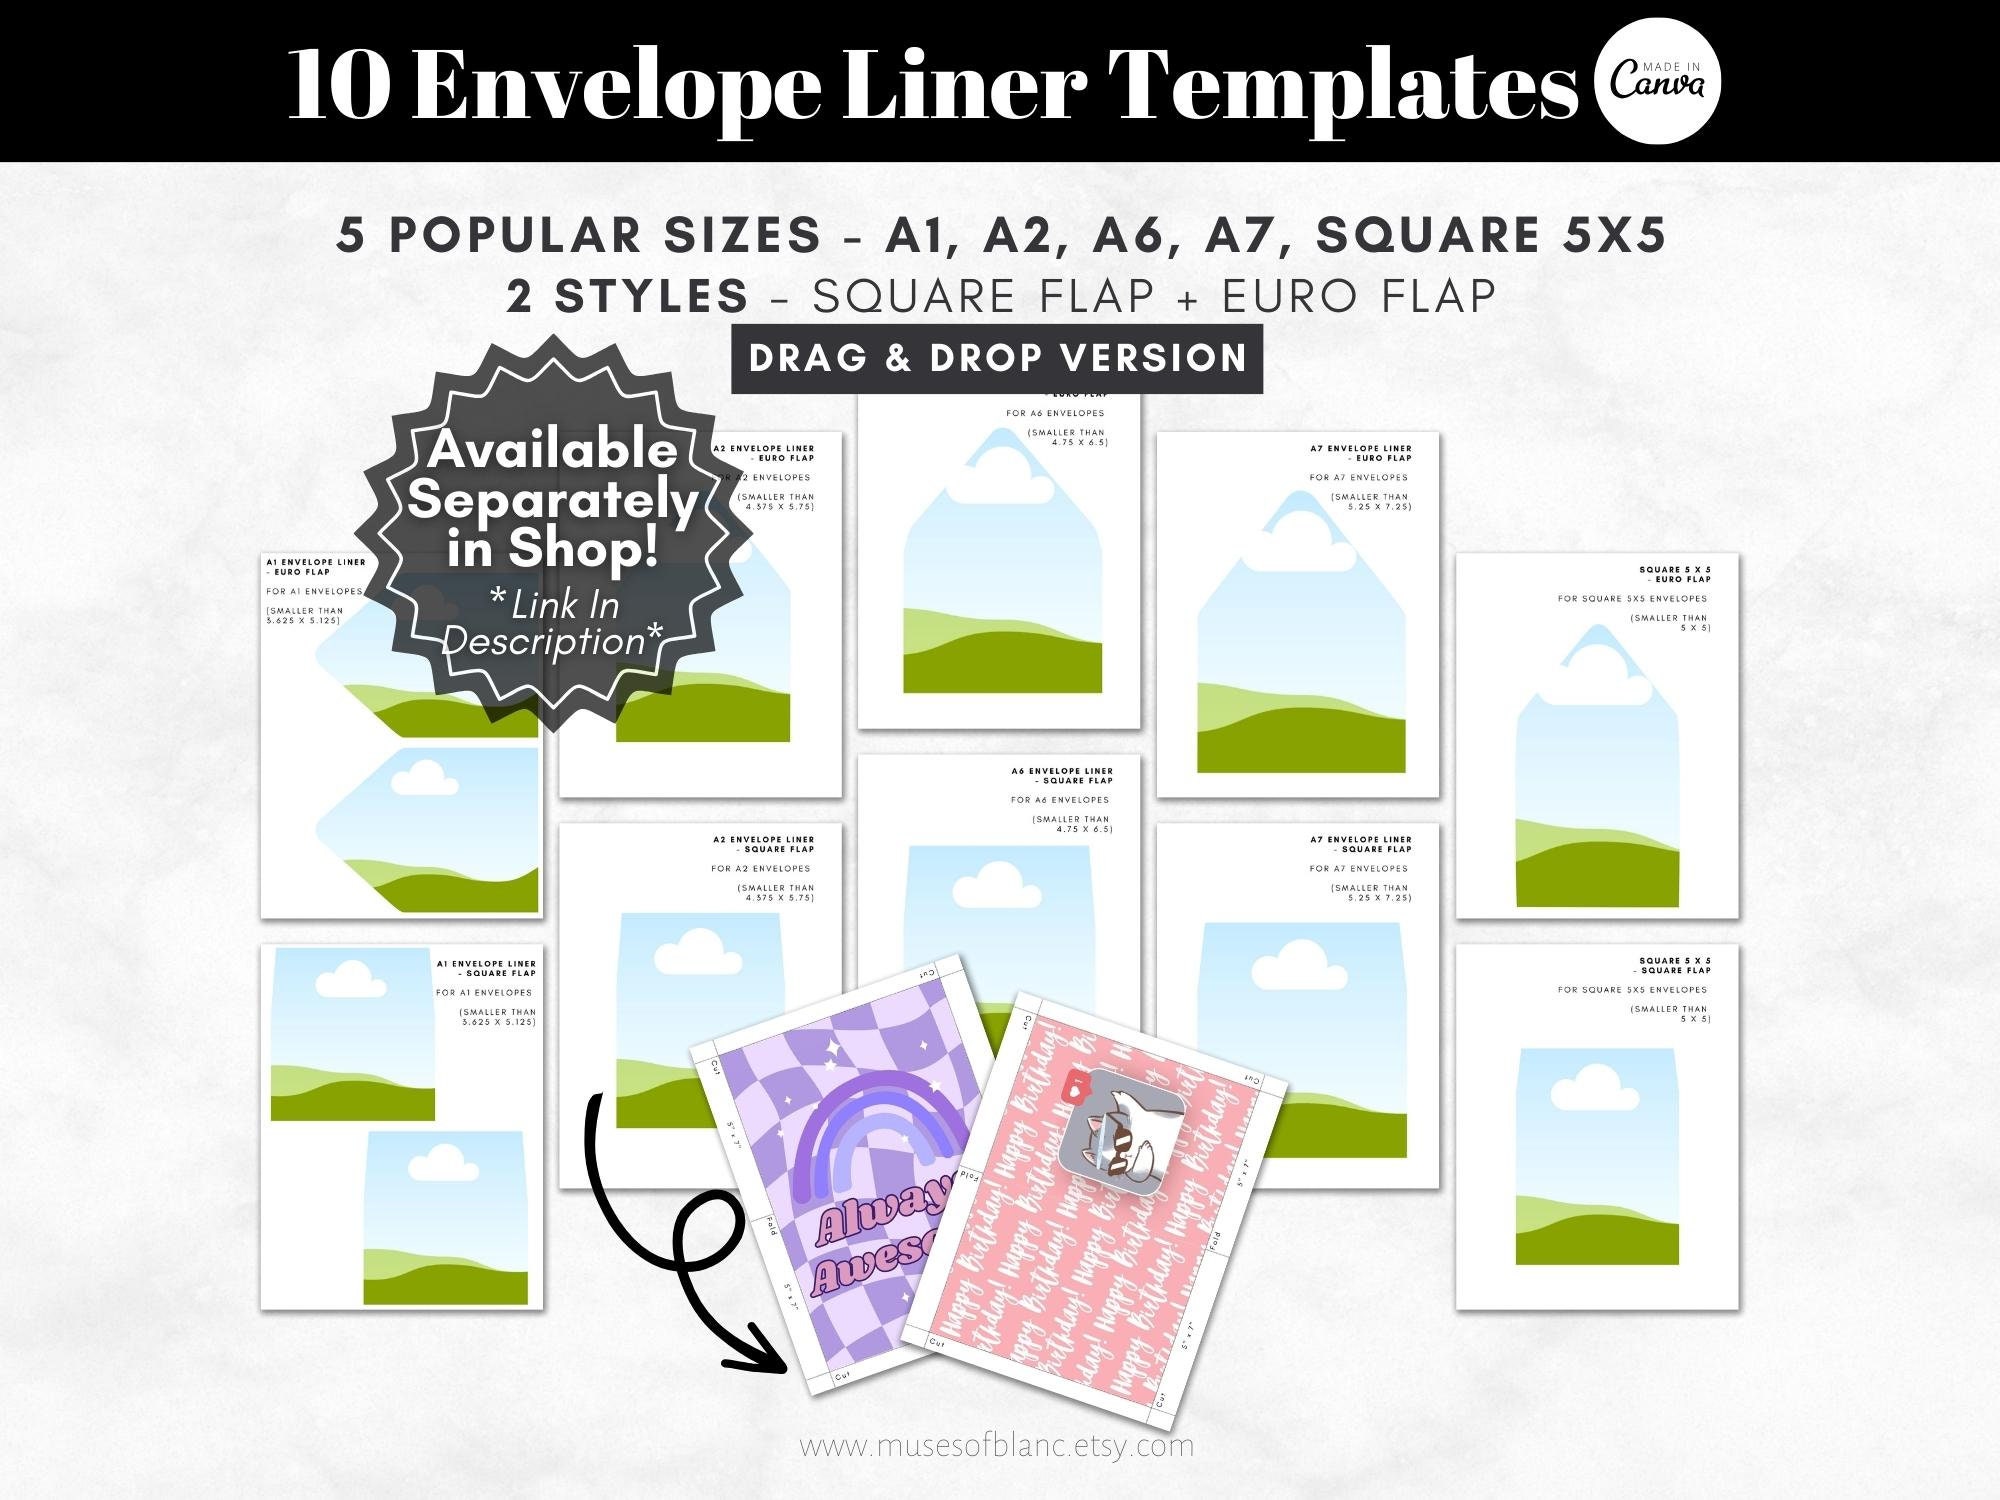 Blank A7 DIY Envelope Liner Templates on Canva Envelope Liner Templates Envelope  Liner 5 X 7 A7 Euroflap,a7 Square Flap,a6,4 BAR,A2 